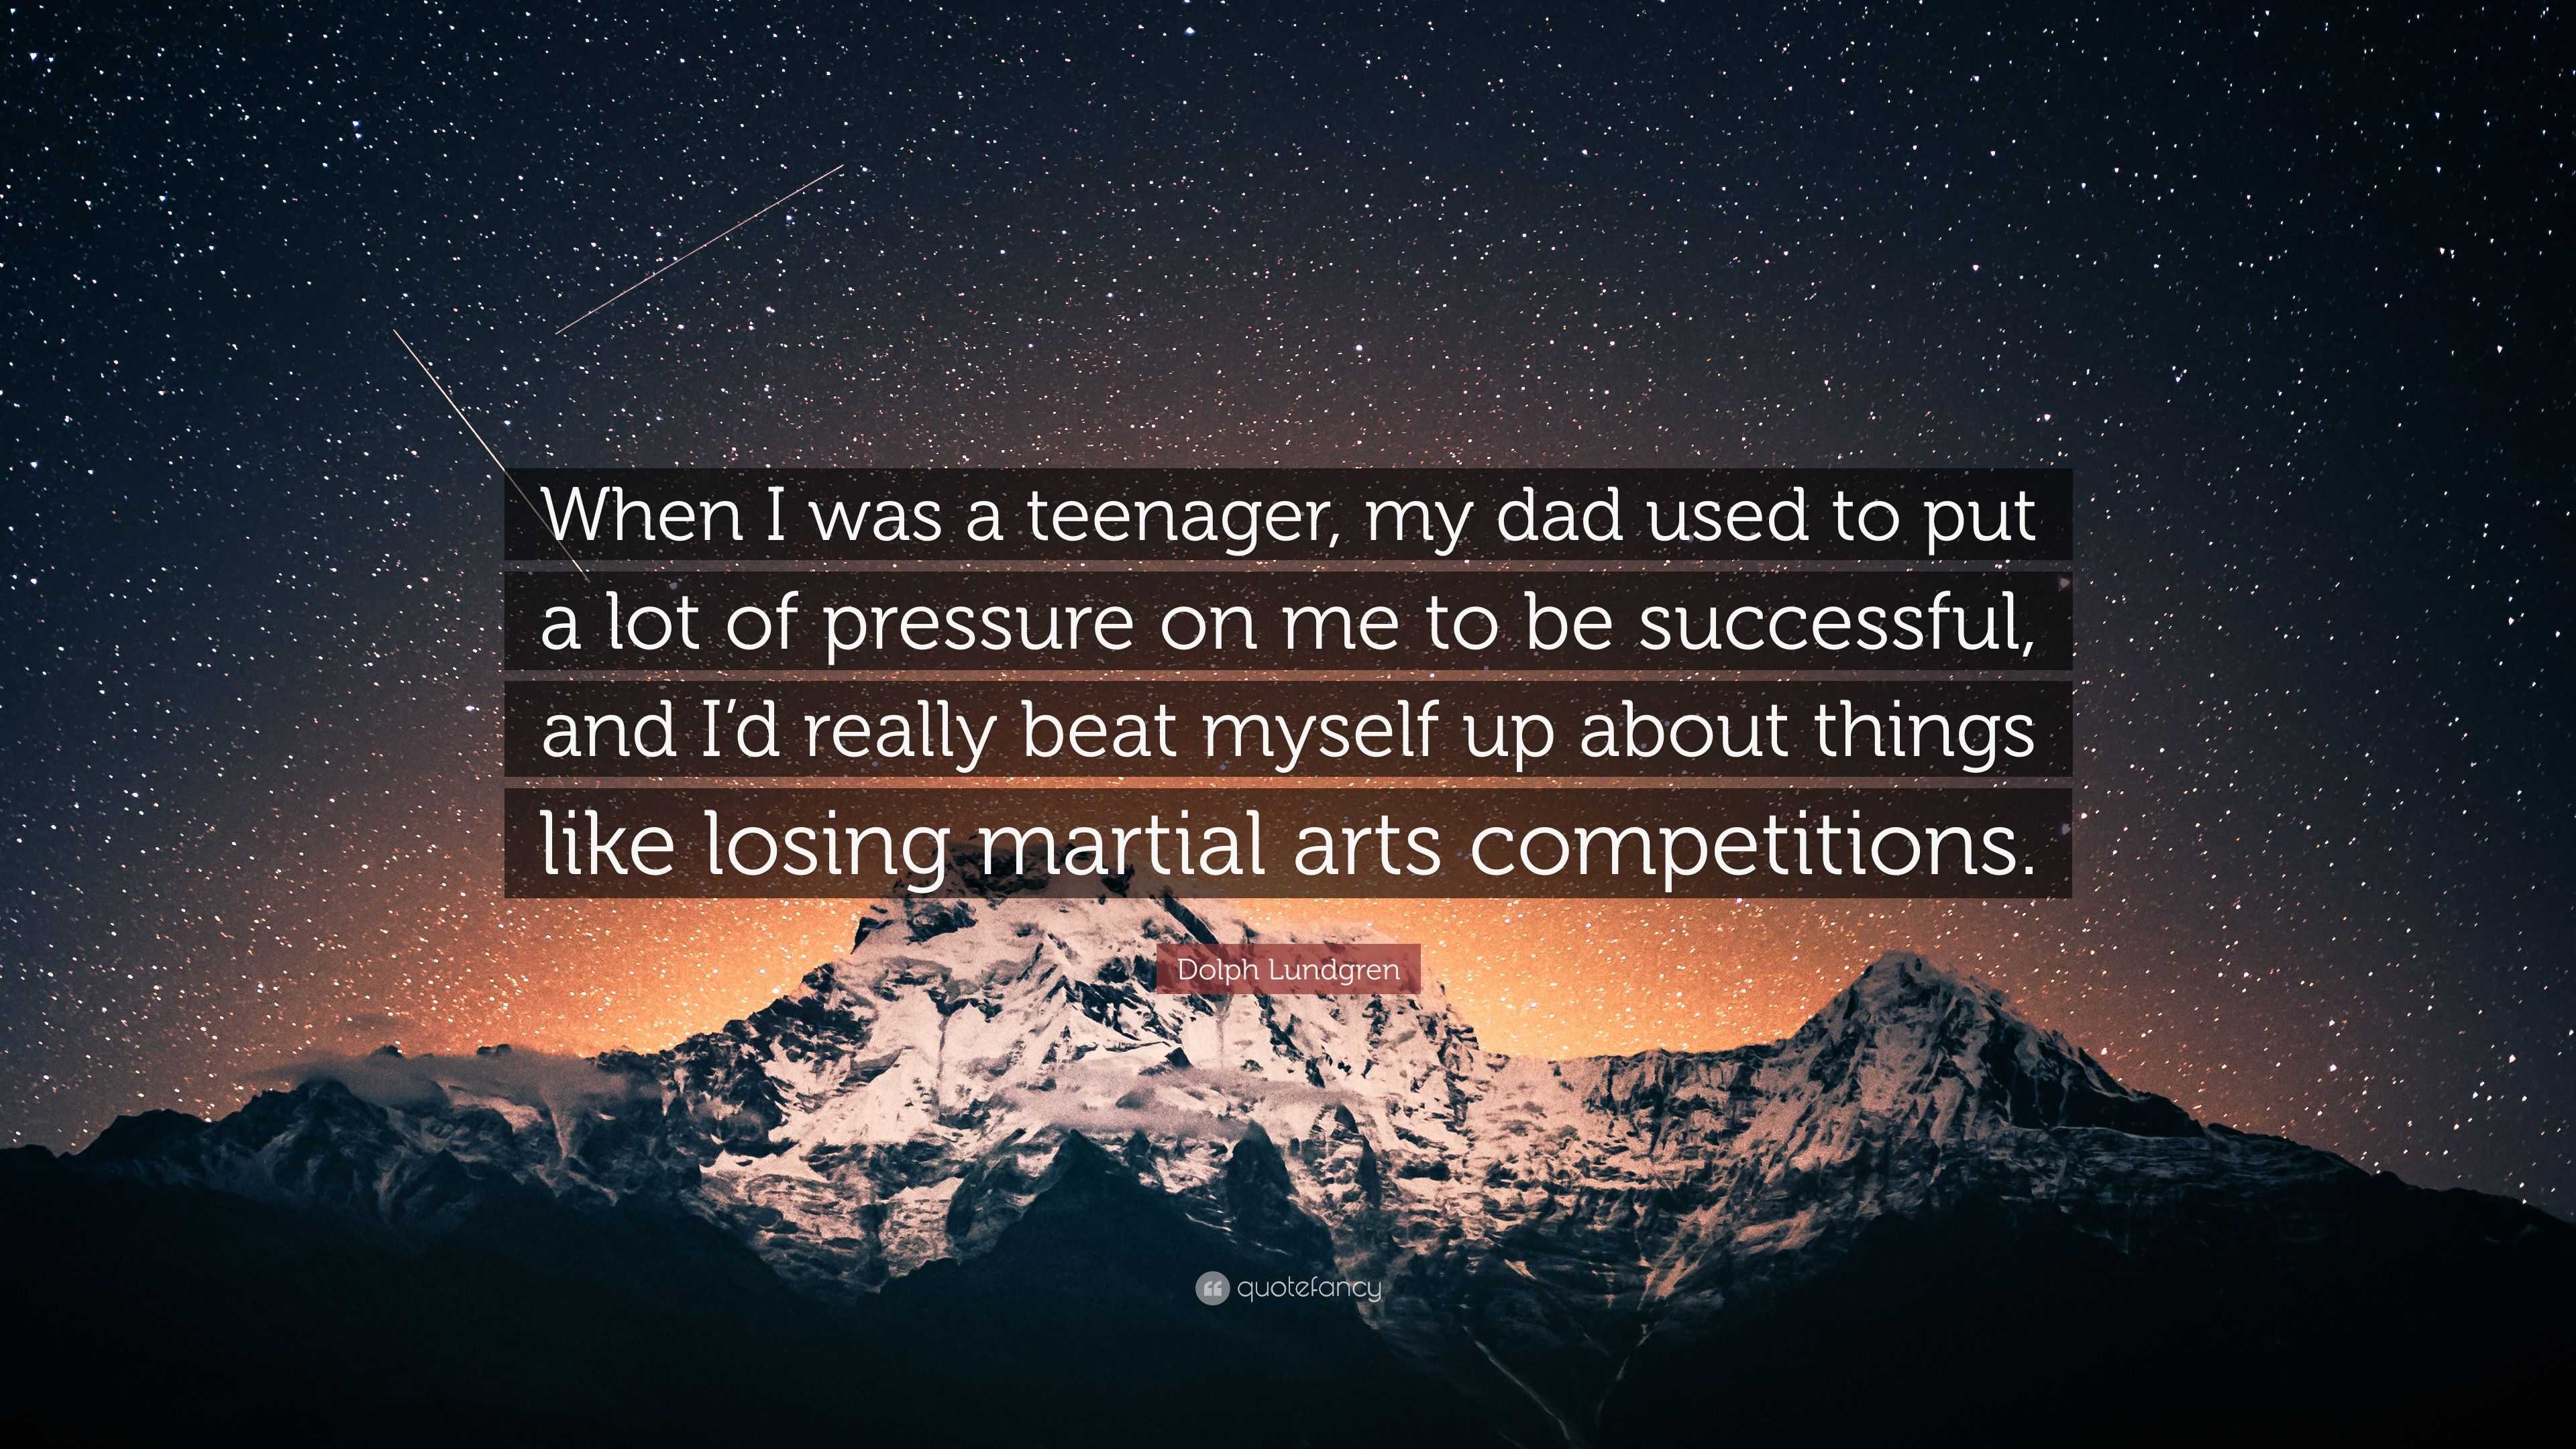 https://quotefancy.com/media/wallpaper/3840x2160/2854397-Dolph-Lundgren-Quote-When-I-was-a-teenager-my-dad-used-to-put-a.jpg